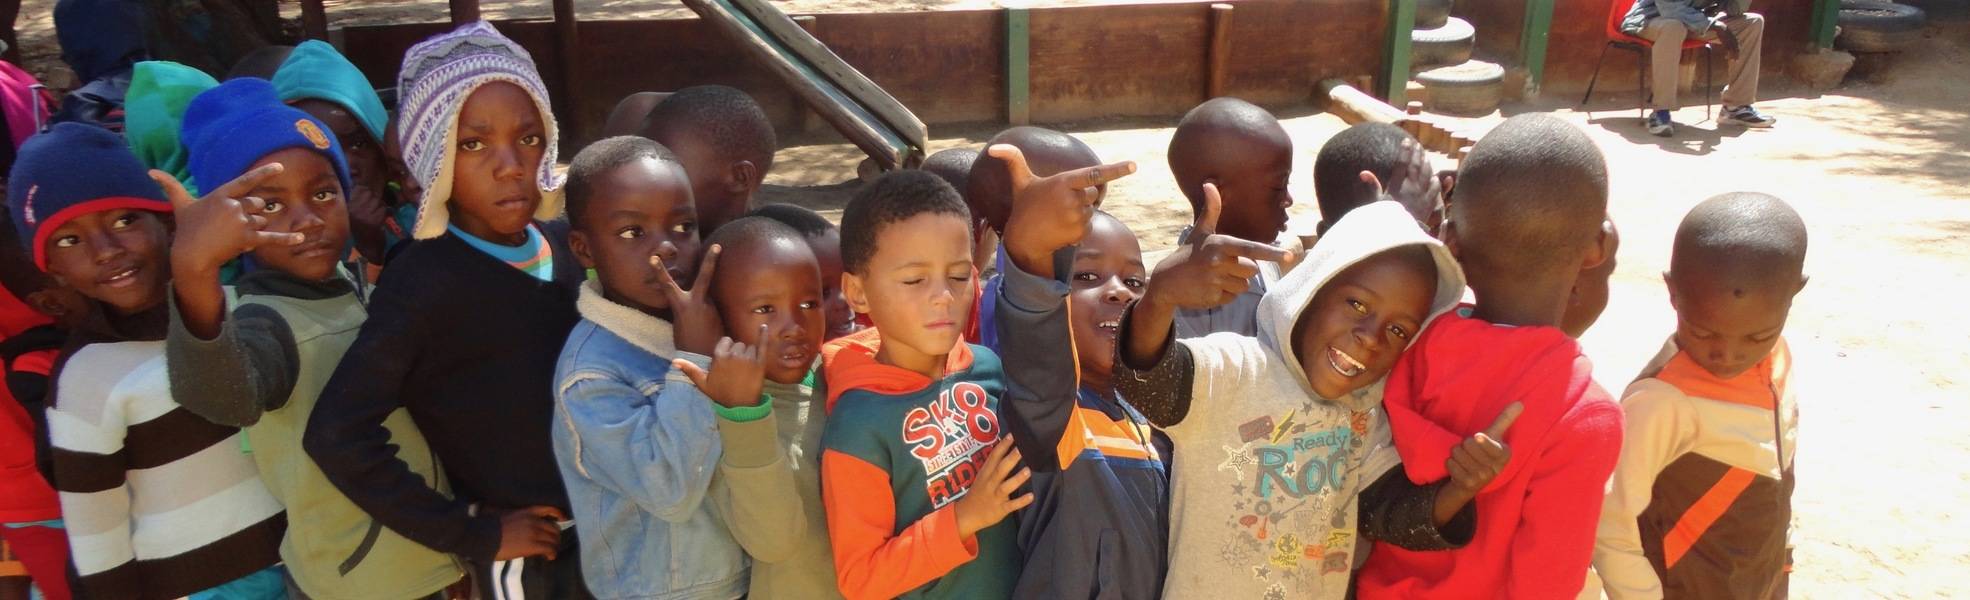 Voluntary work in childcare in Namibia